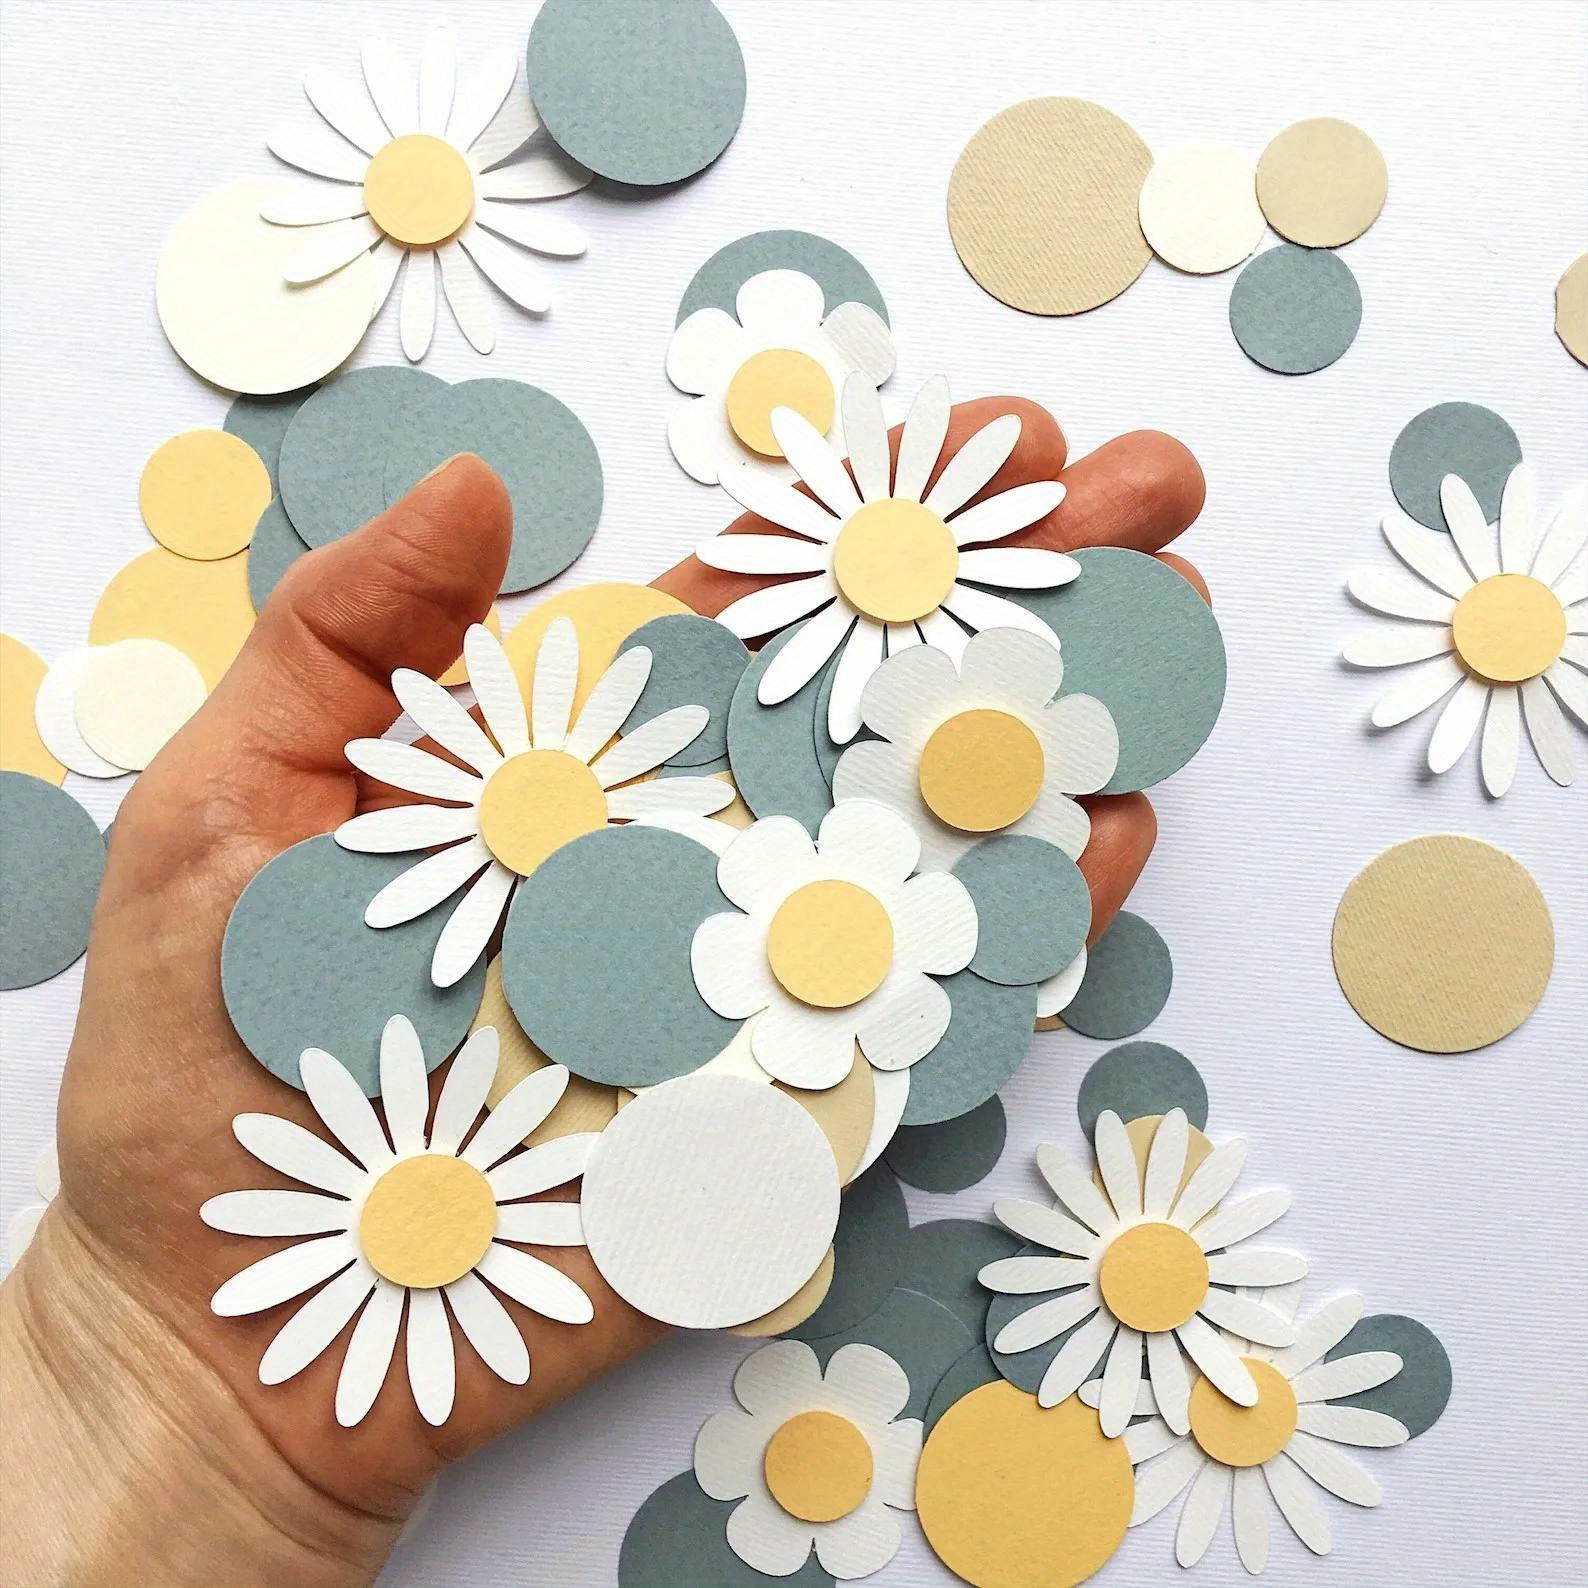 

Set, Round Sweet Daisy Flower Paper Confetti Wedding Table Scatter Gender Birthday Handmade Paper Flowers Christmas Decoration Flower Confetti Party Gift Box Decor